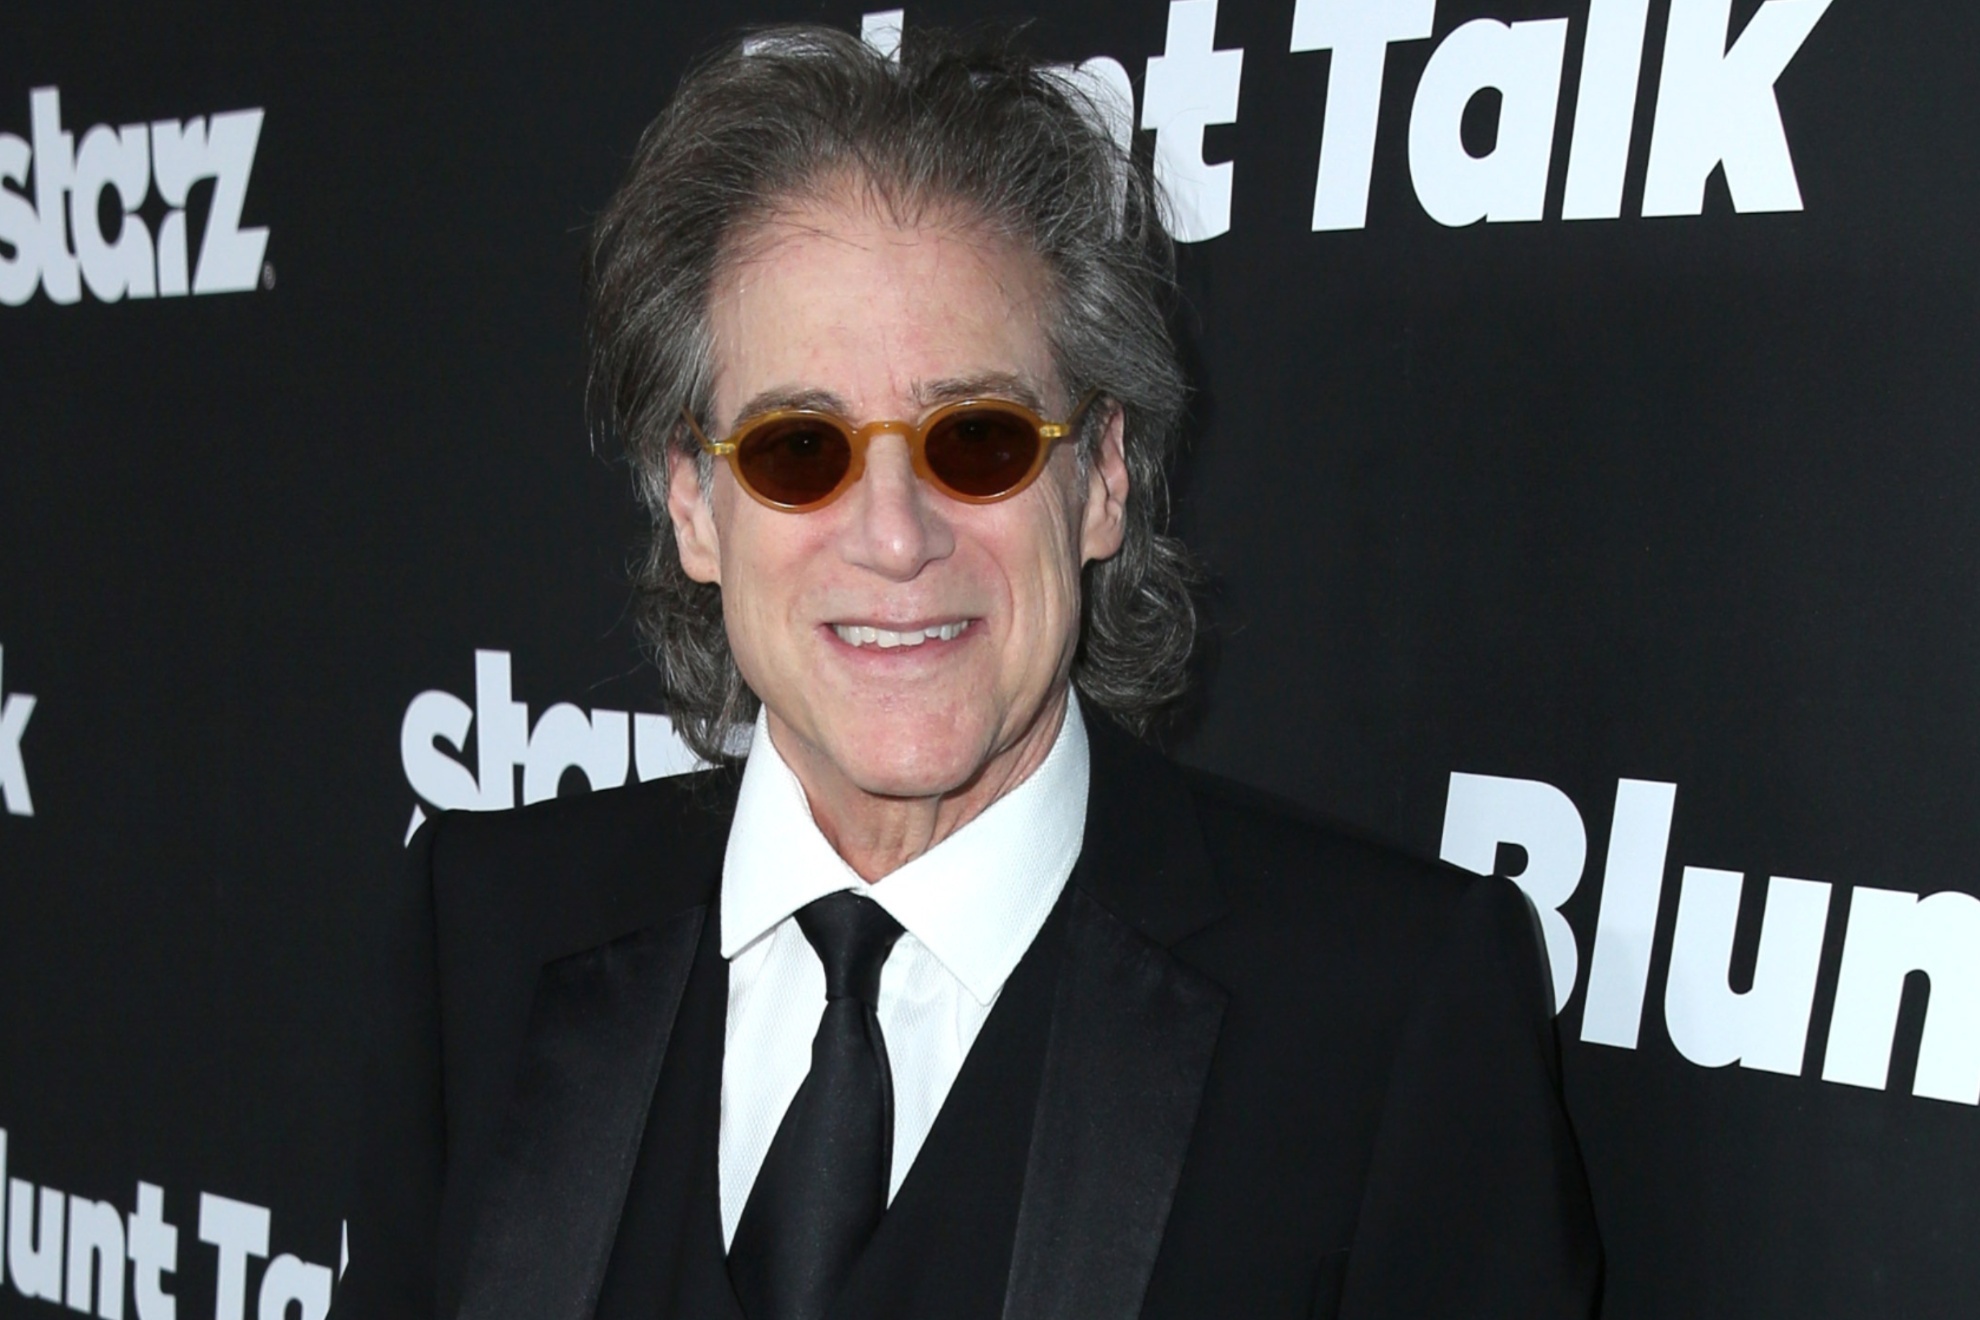 Richard Lewis died in Los Angeles on Tuesday at the age of 76